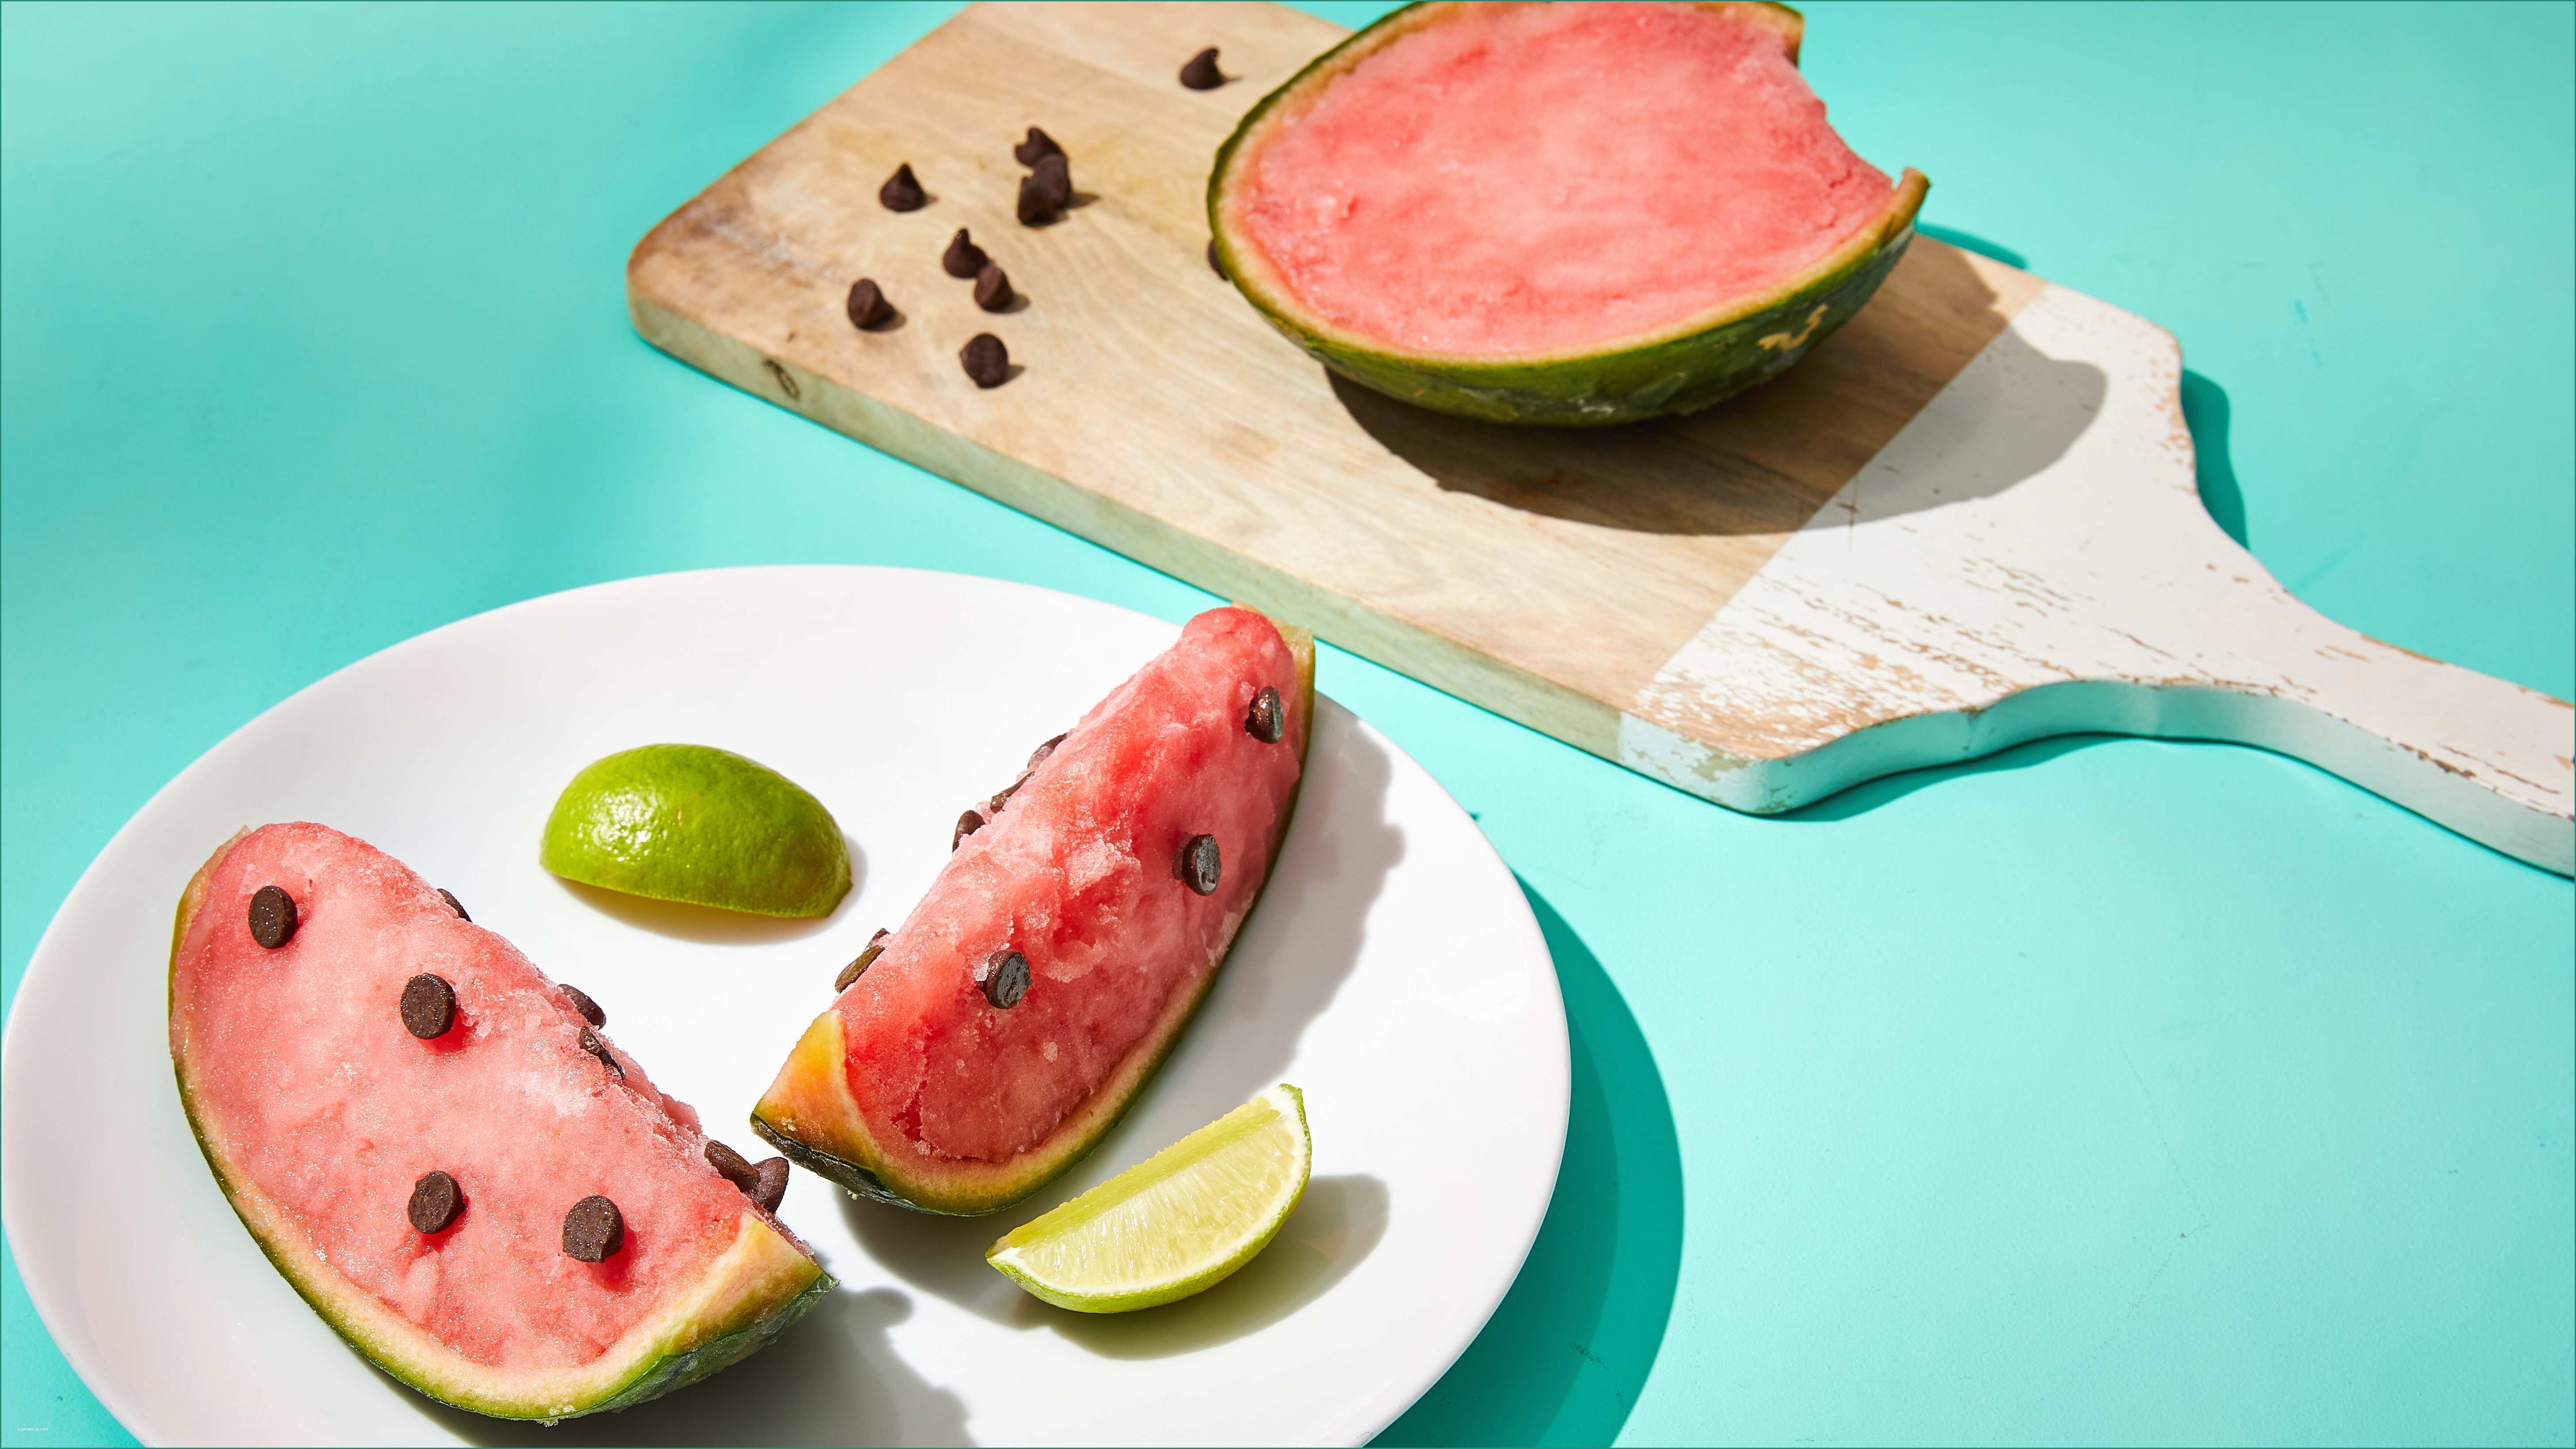 Leroy Merlin Persiane E This Watermelon sorbet is Served Inside An Actual Watermelon and It